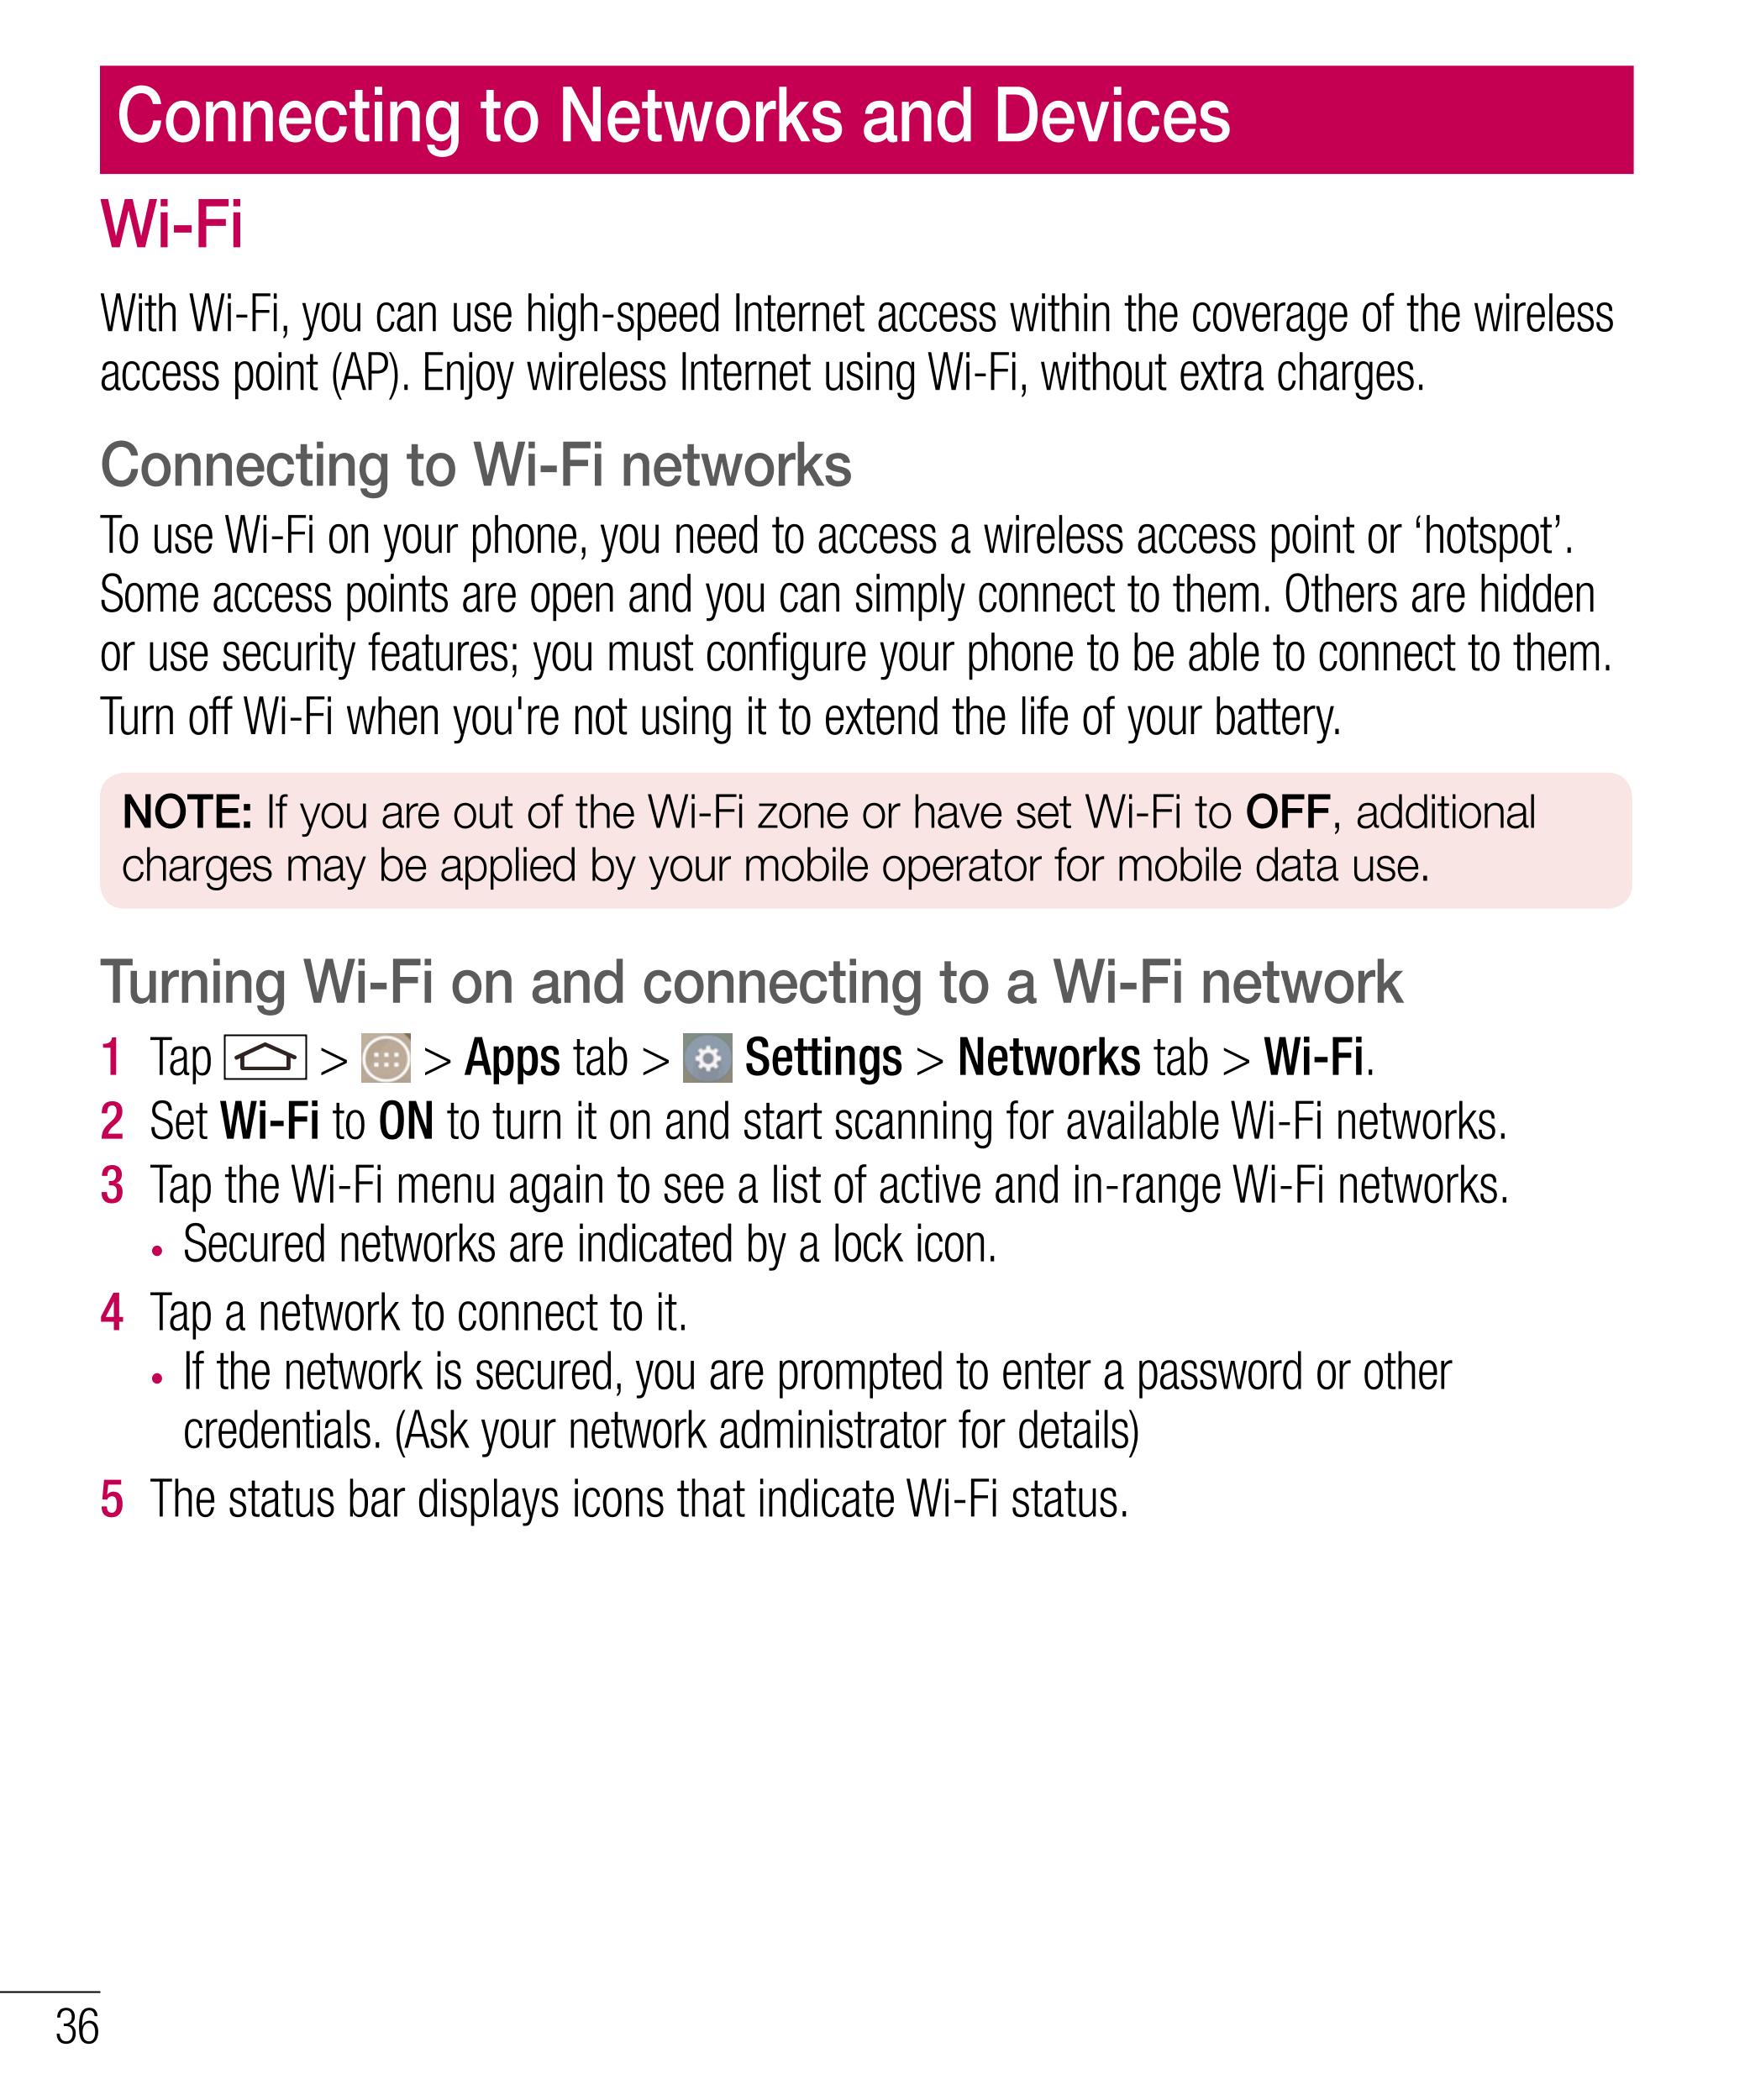 Connecting to Networks and Devices
Wi-Fi
With Wi-Fi, you can use high-speed Internet access within the coverage of the wireless 